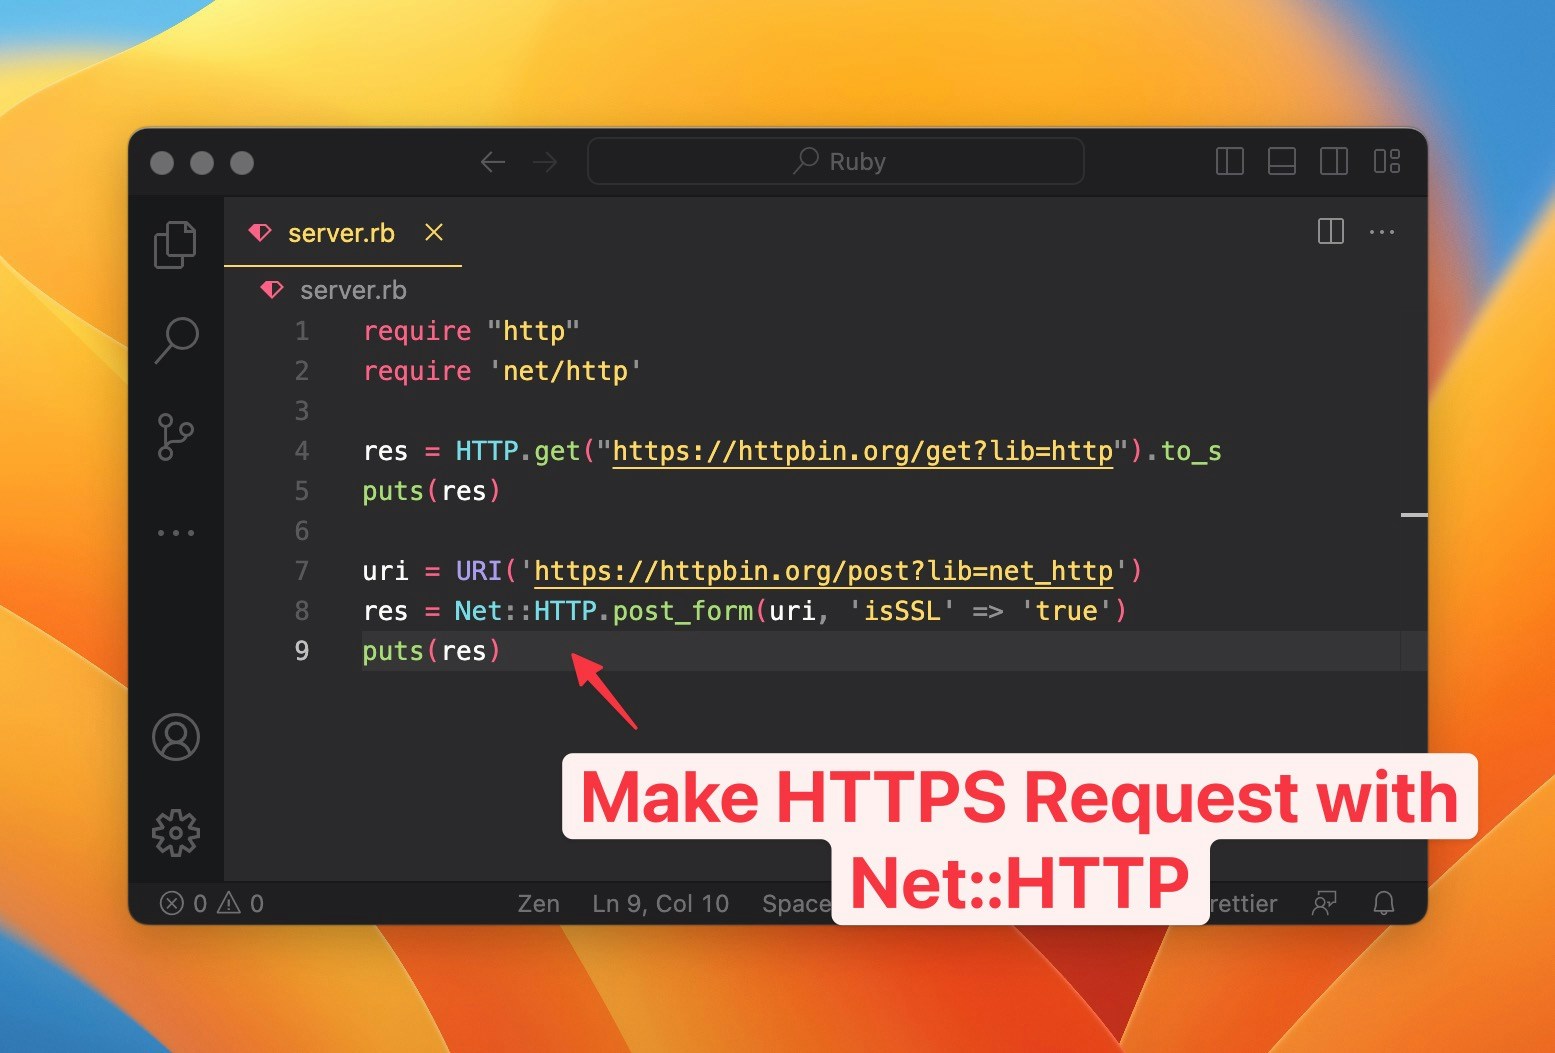 Cover Image for Capture HTTP/HTTPS Request from Ruby (net::http, or http gem) scripts